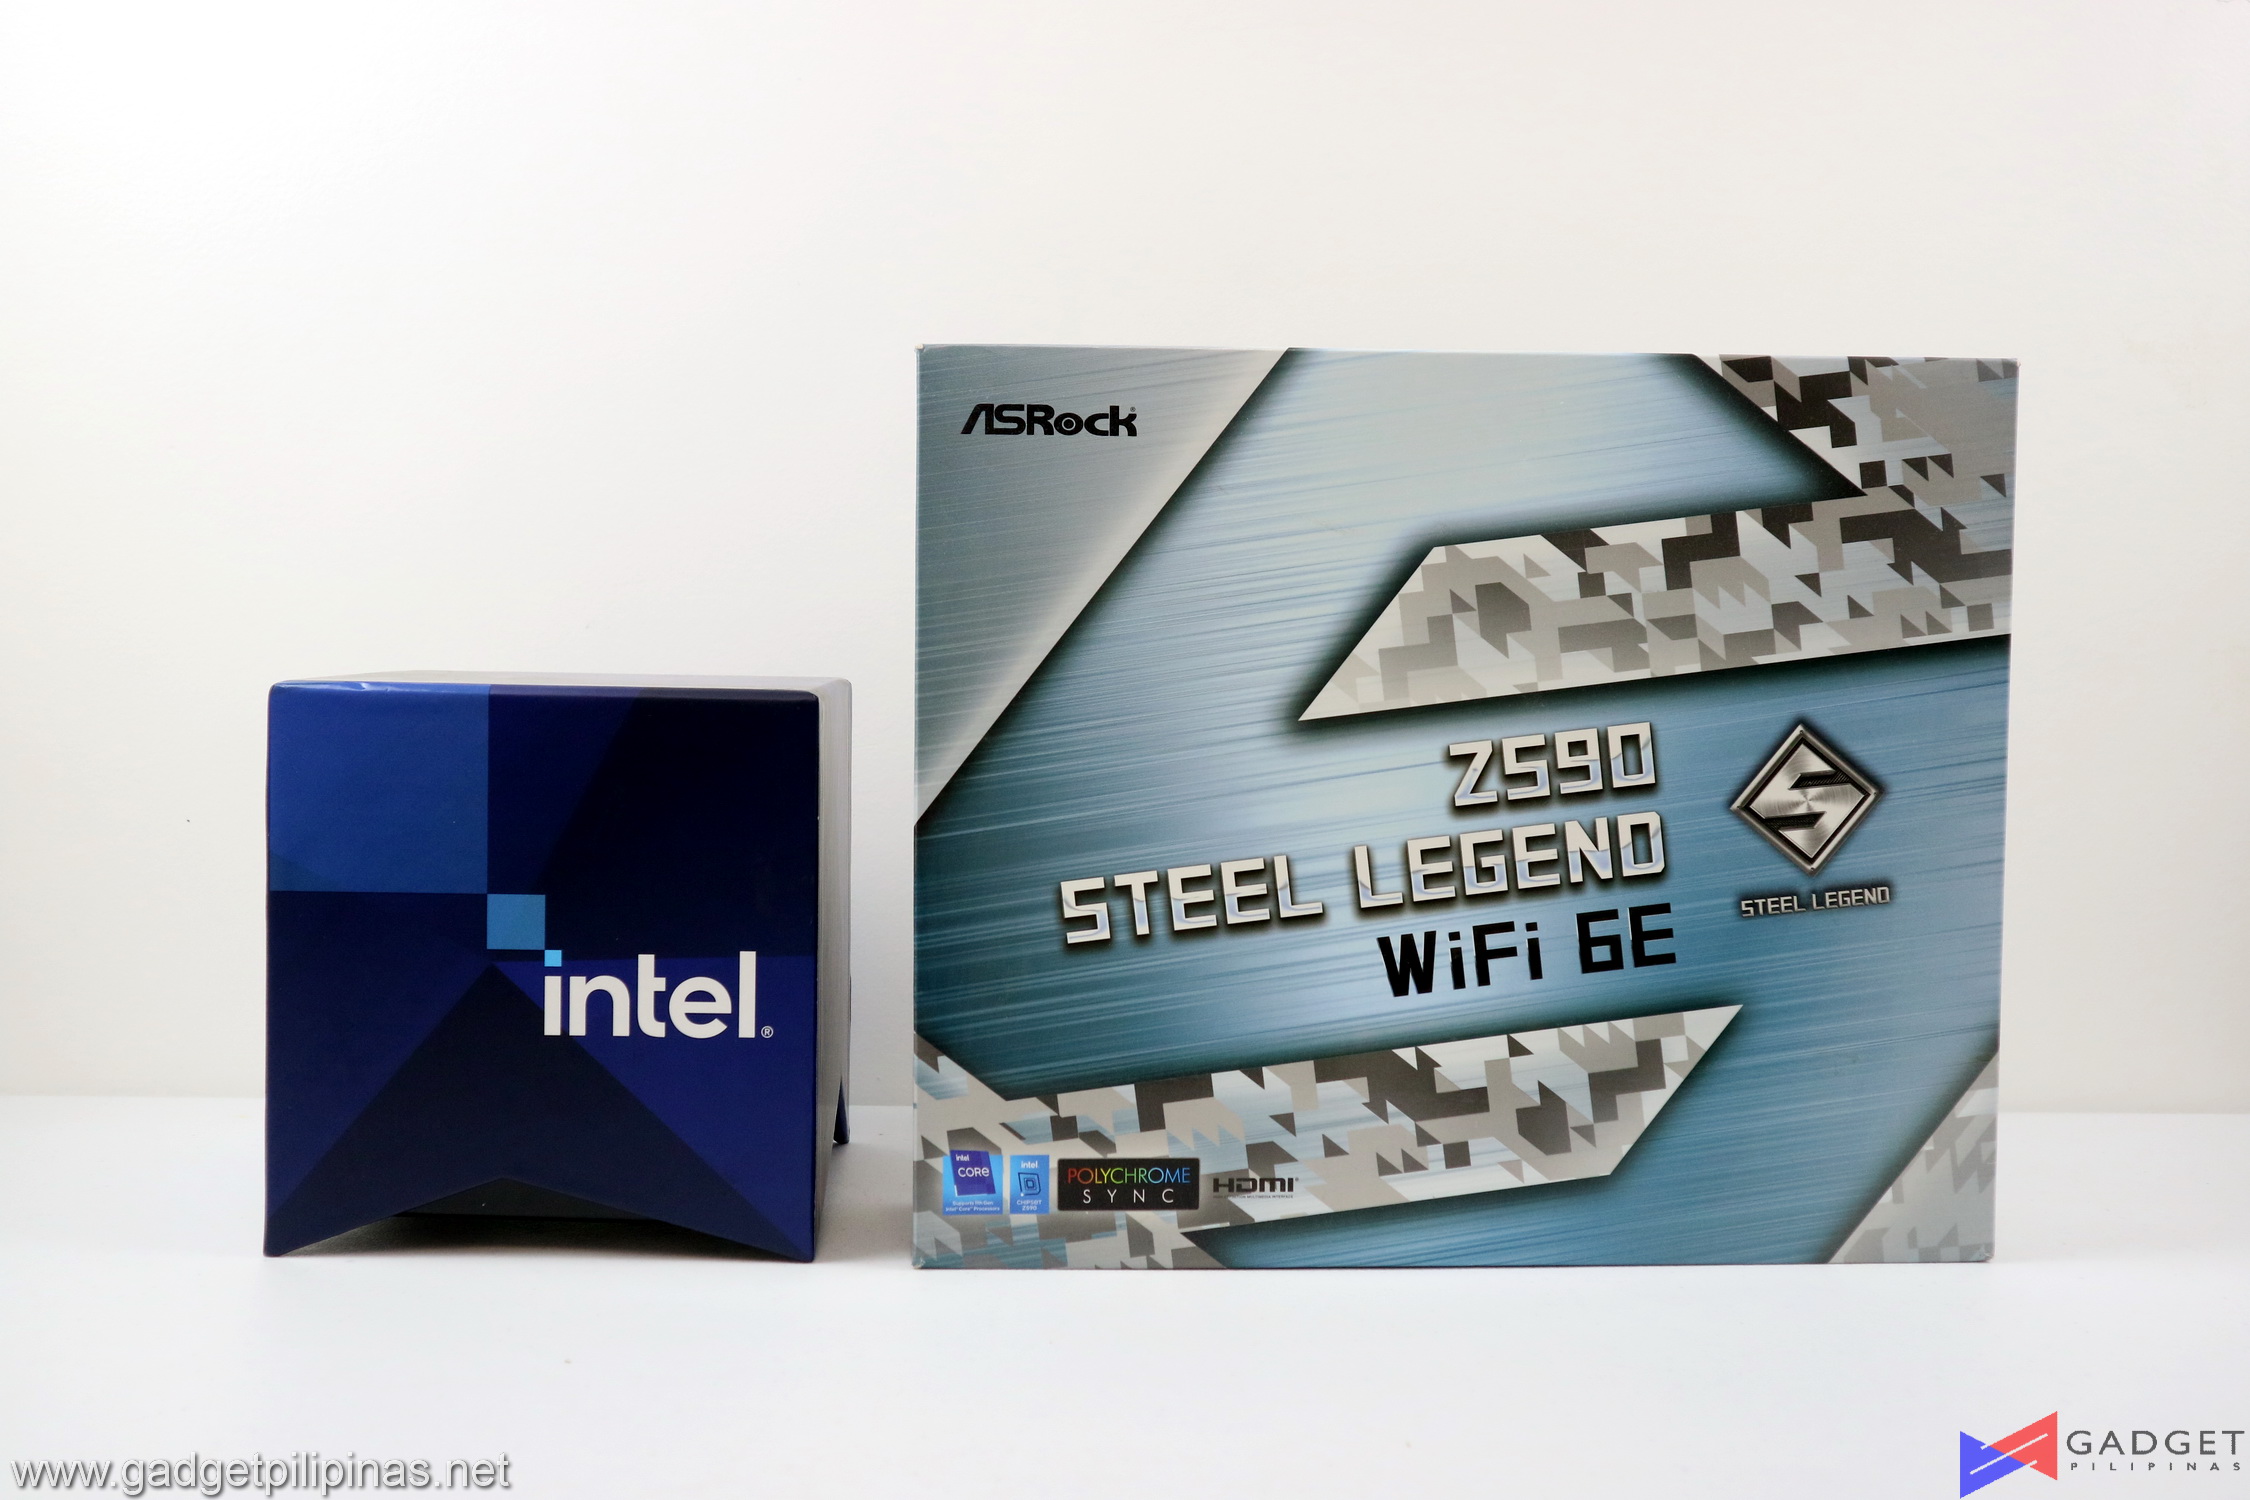 ASRock Z590 Steel Legend WiFi 6E Motherboard Review – Low Priced, Feature Packed